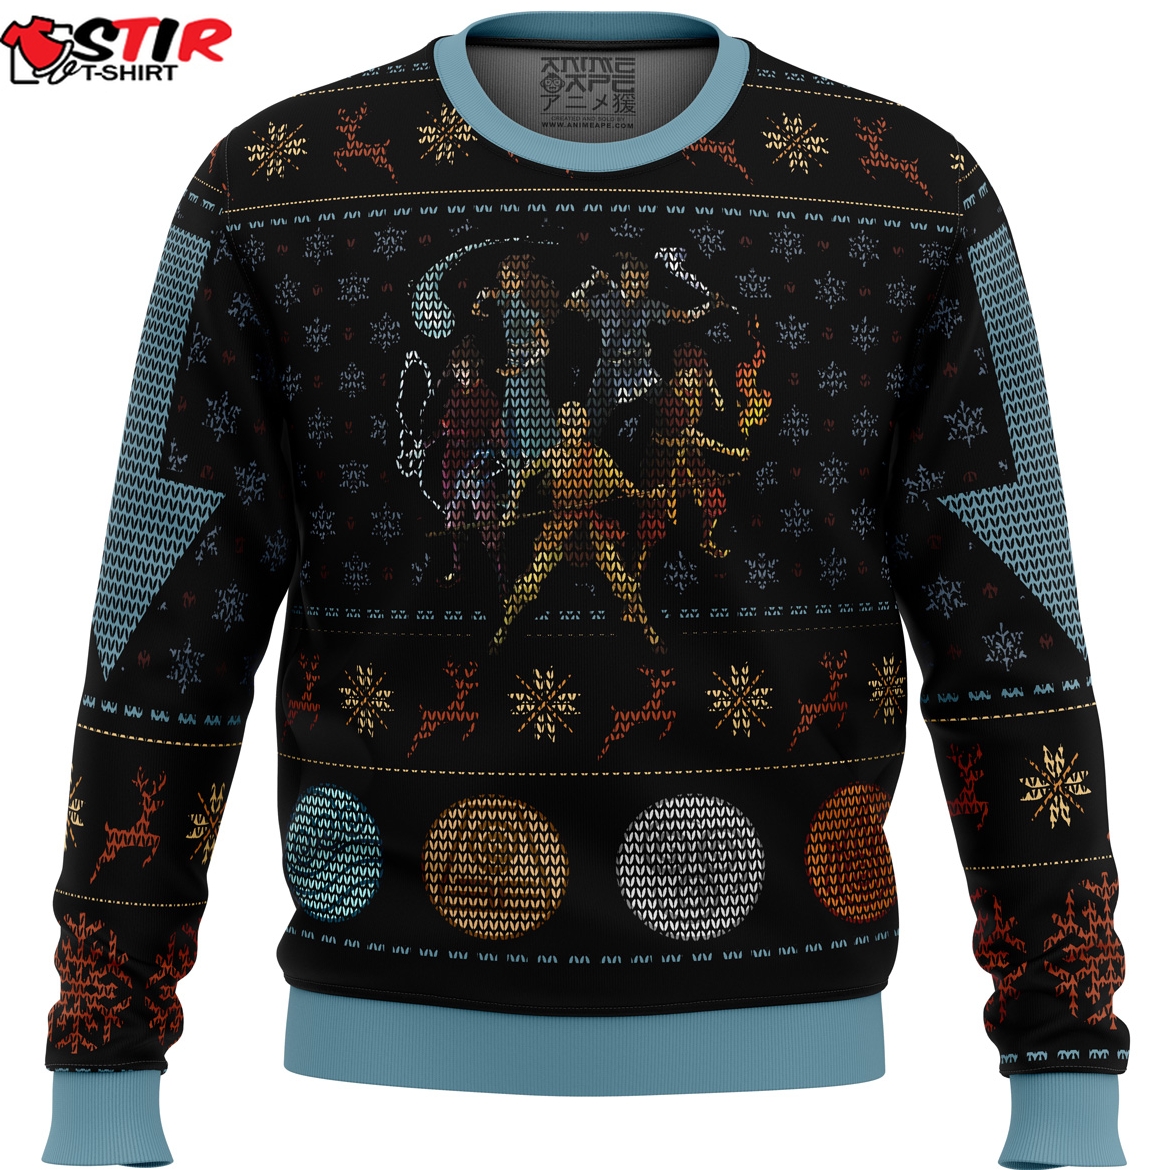 Avatar The Last Airbender Ugly Christmas Sweater Stirtshirt